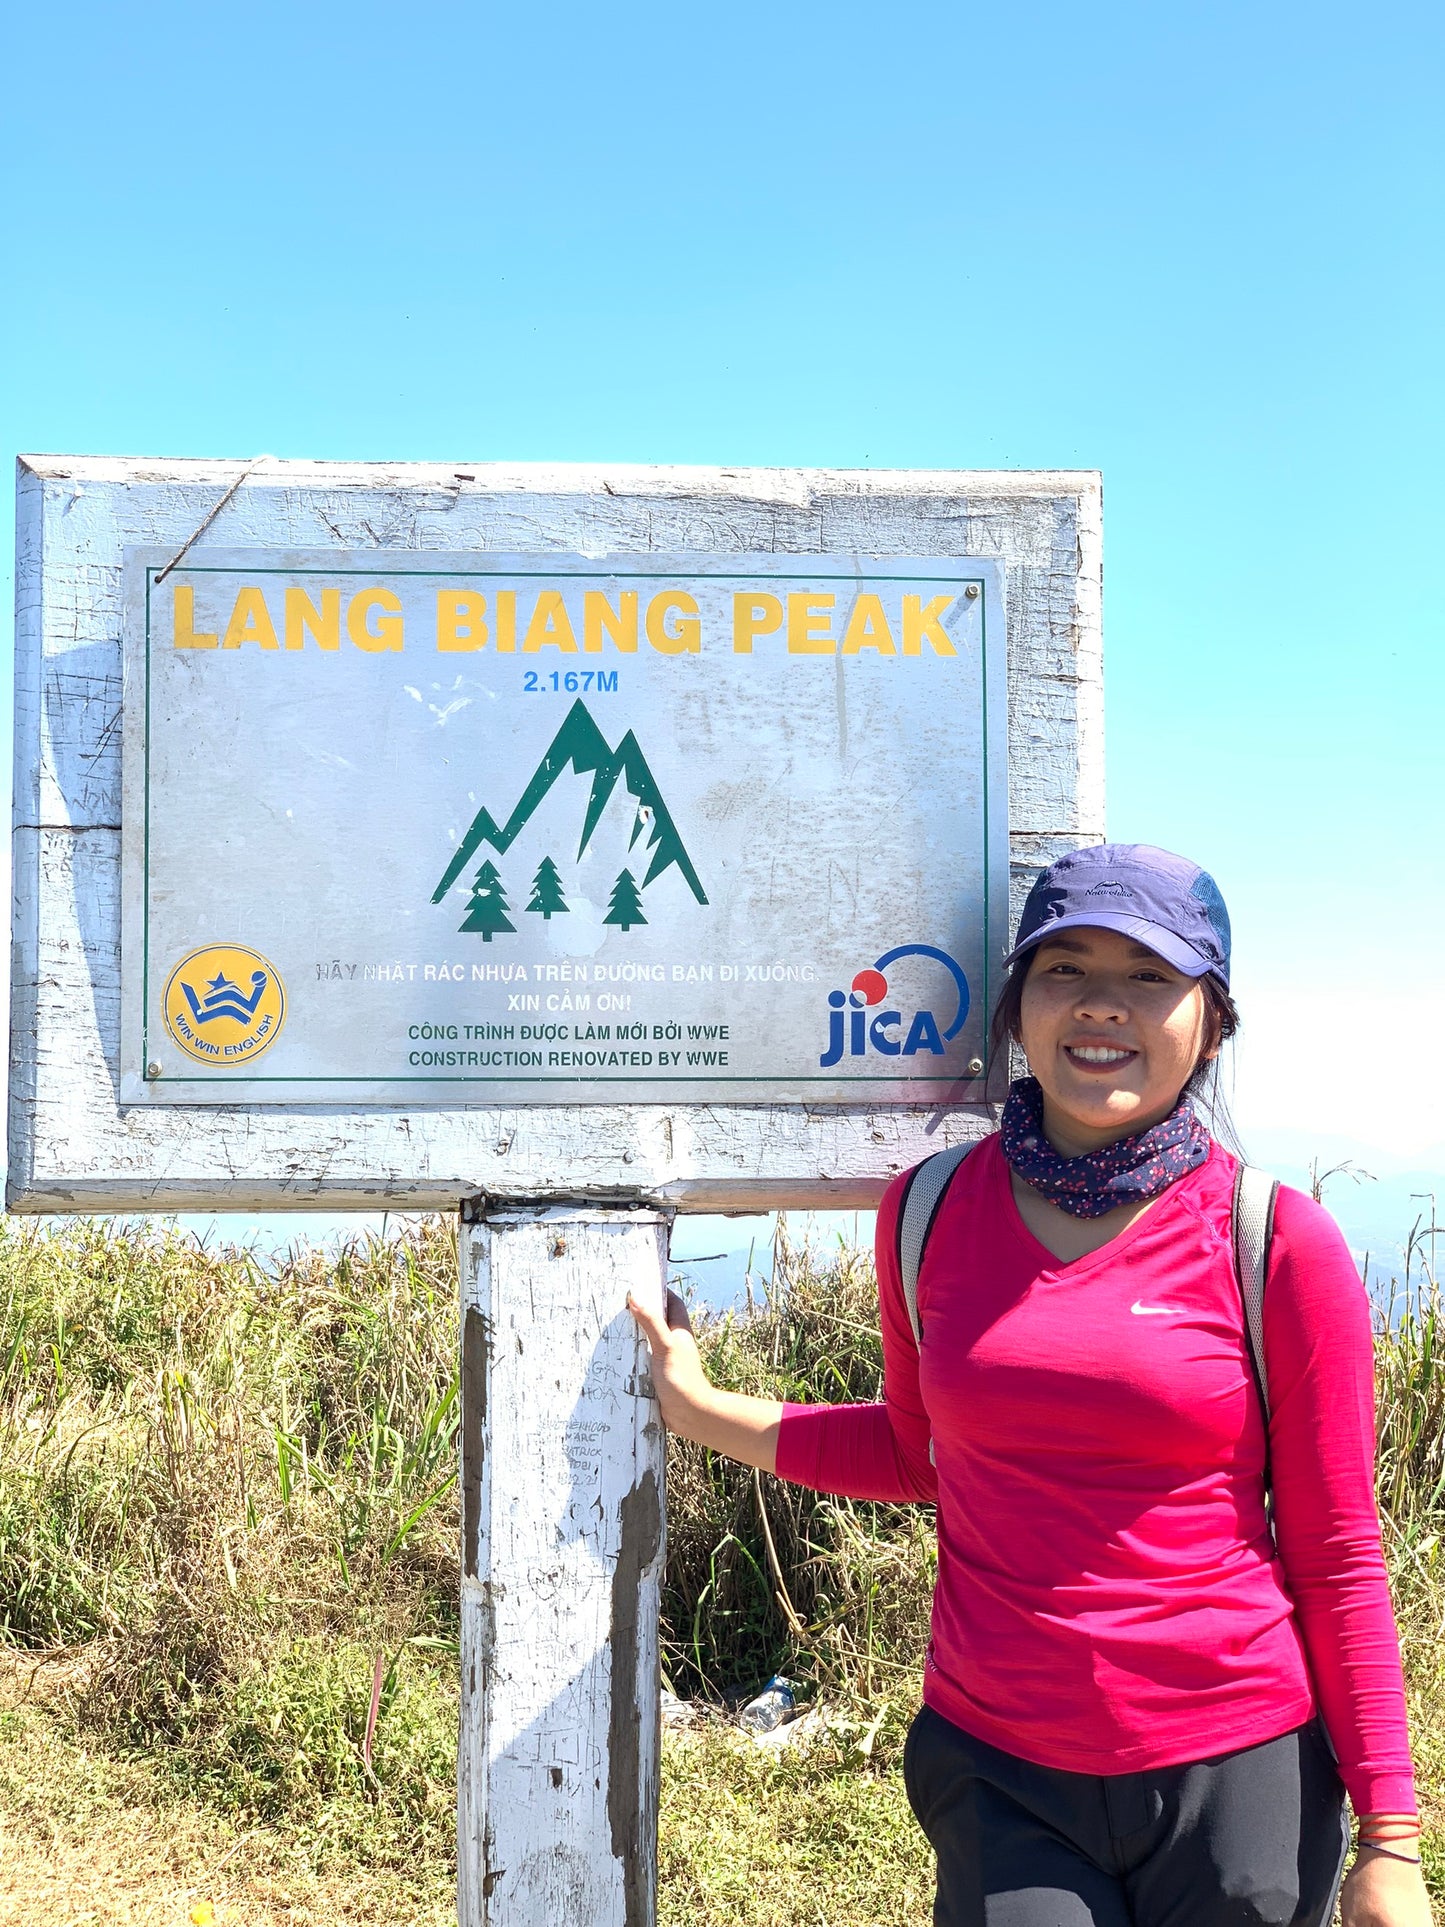 15B (2 Days): Mt.Langbiang (2167m): Conquering The Peak Of Dalat, Witnessing The Enveloping Mist